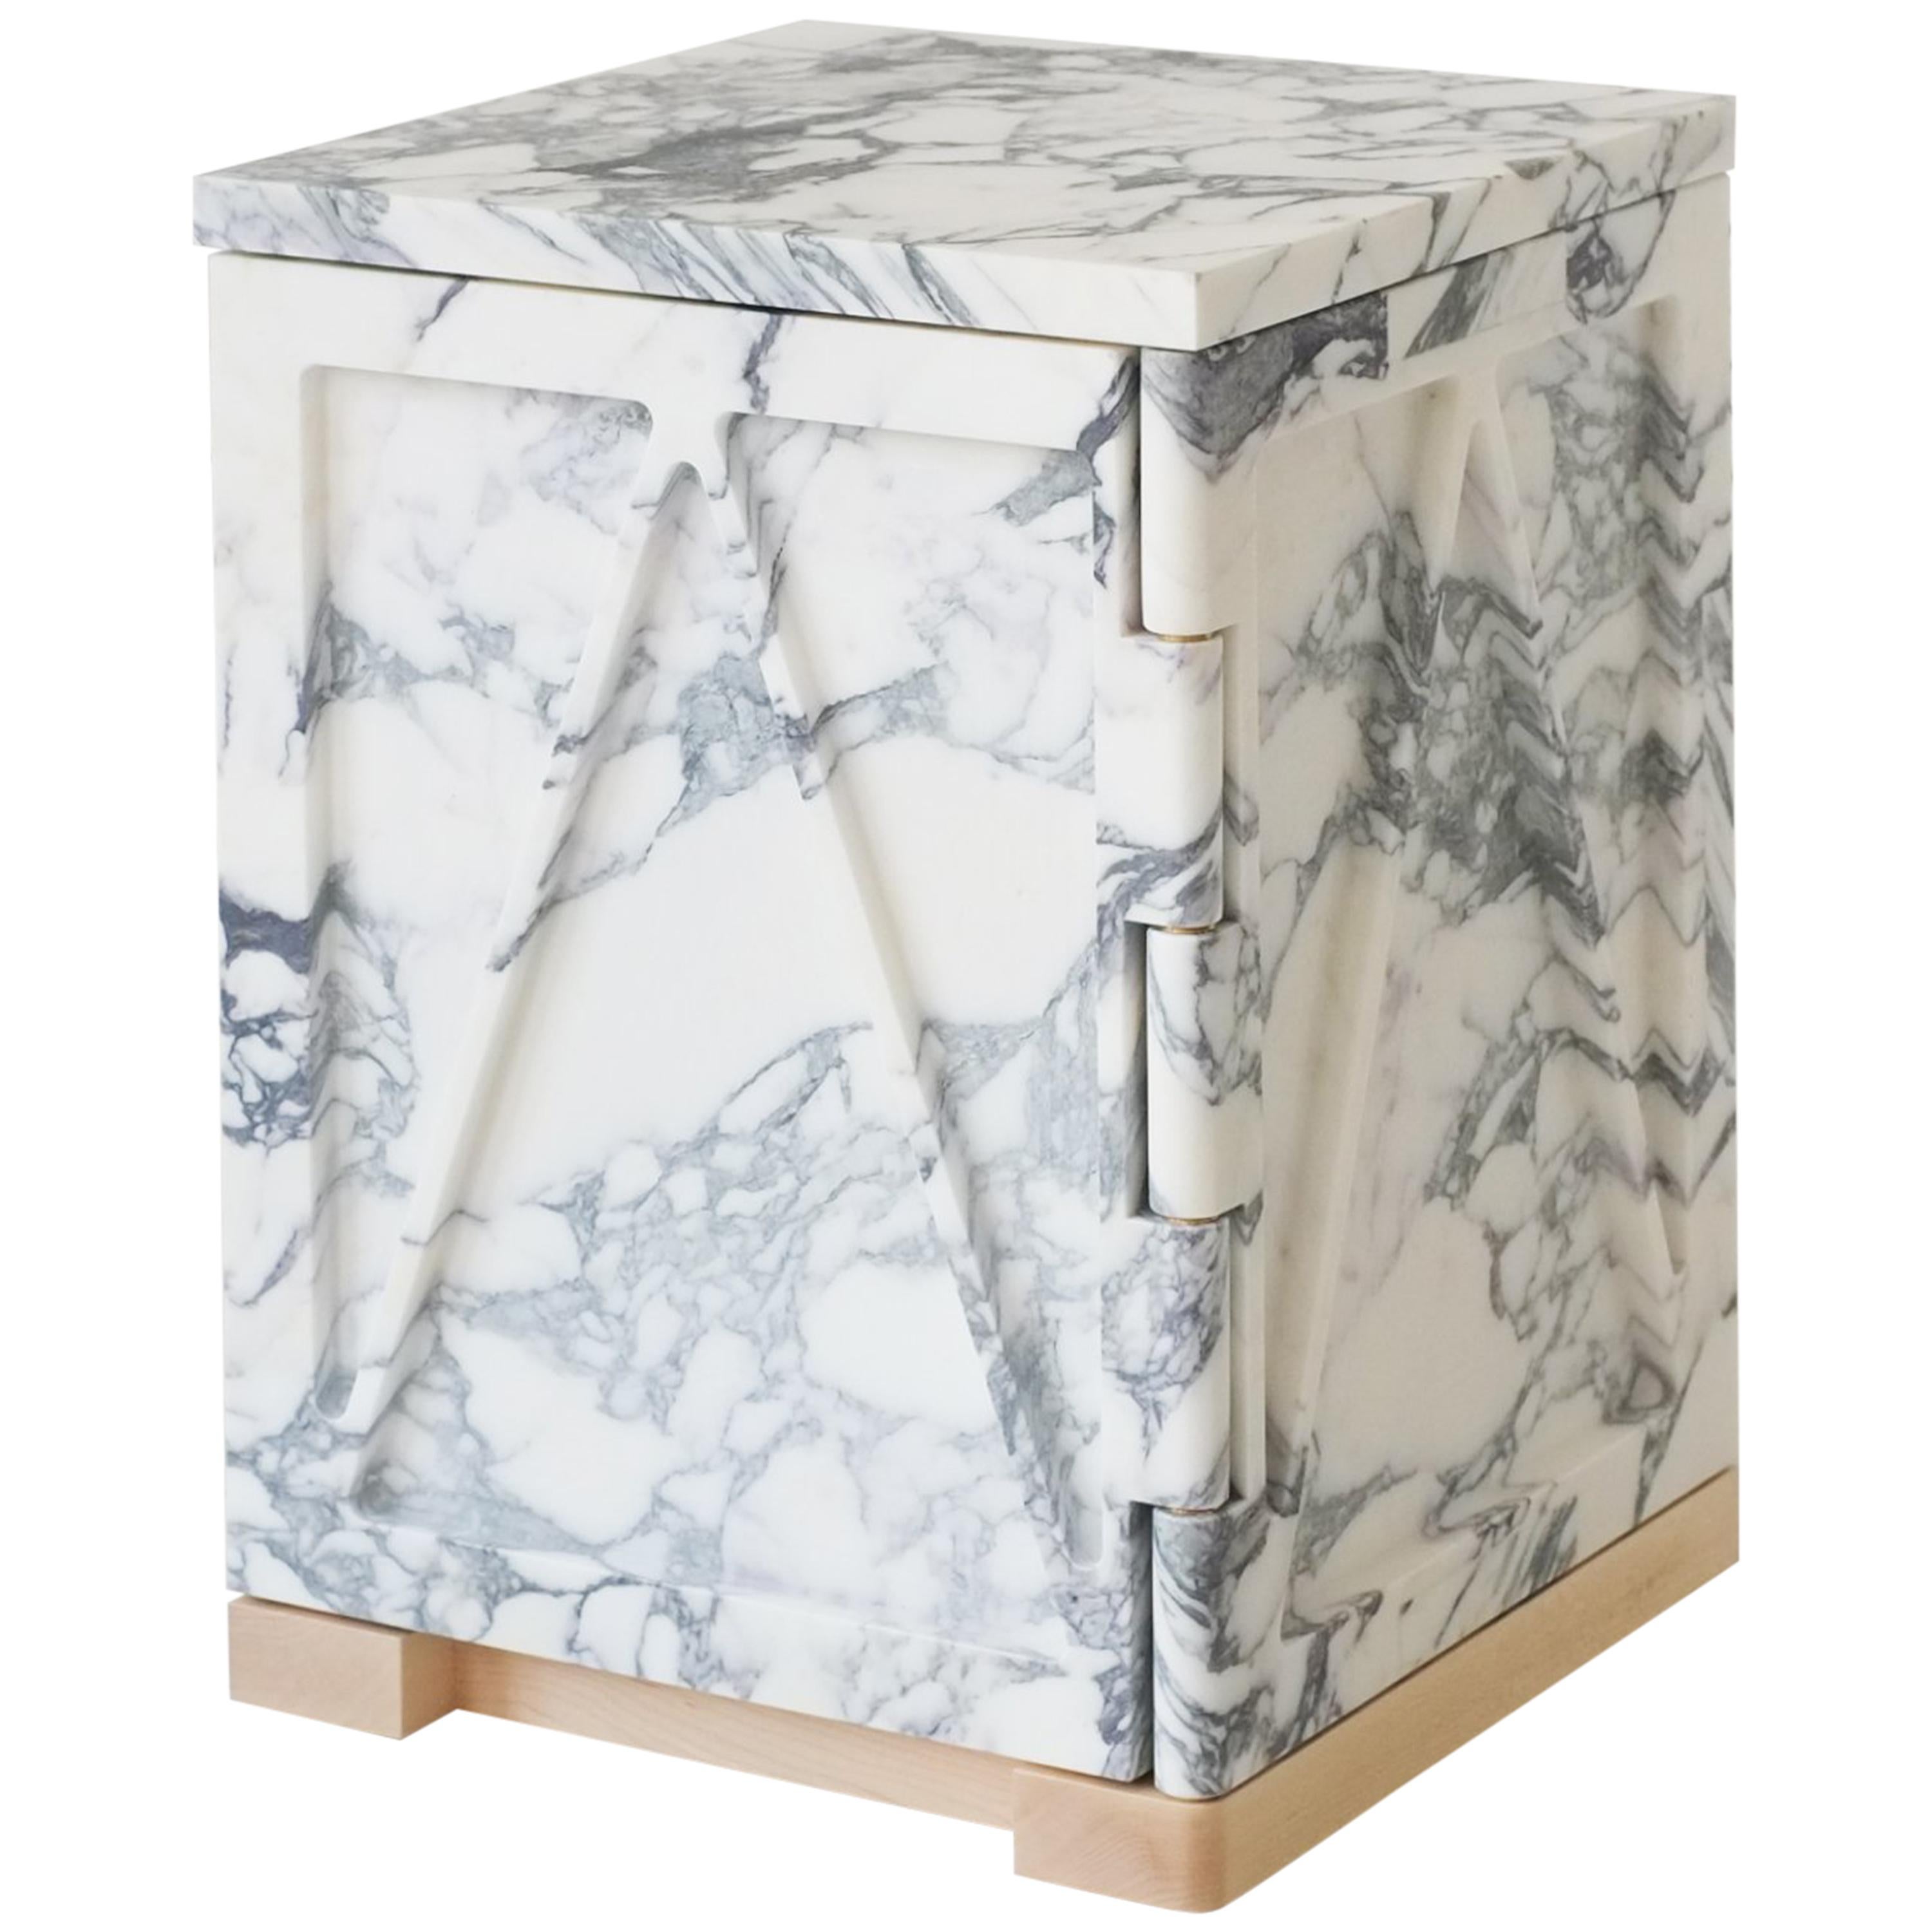 Single Door Relief Stone Cabinet in Marble by Fort Standard